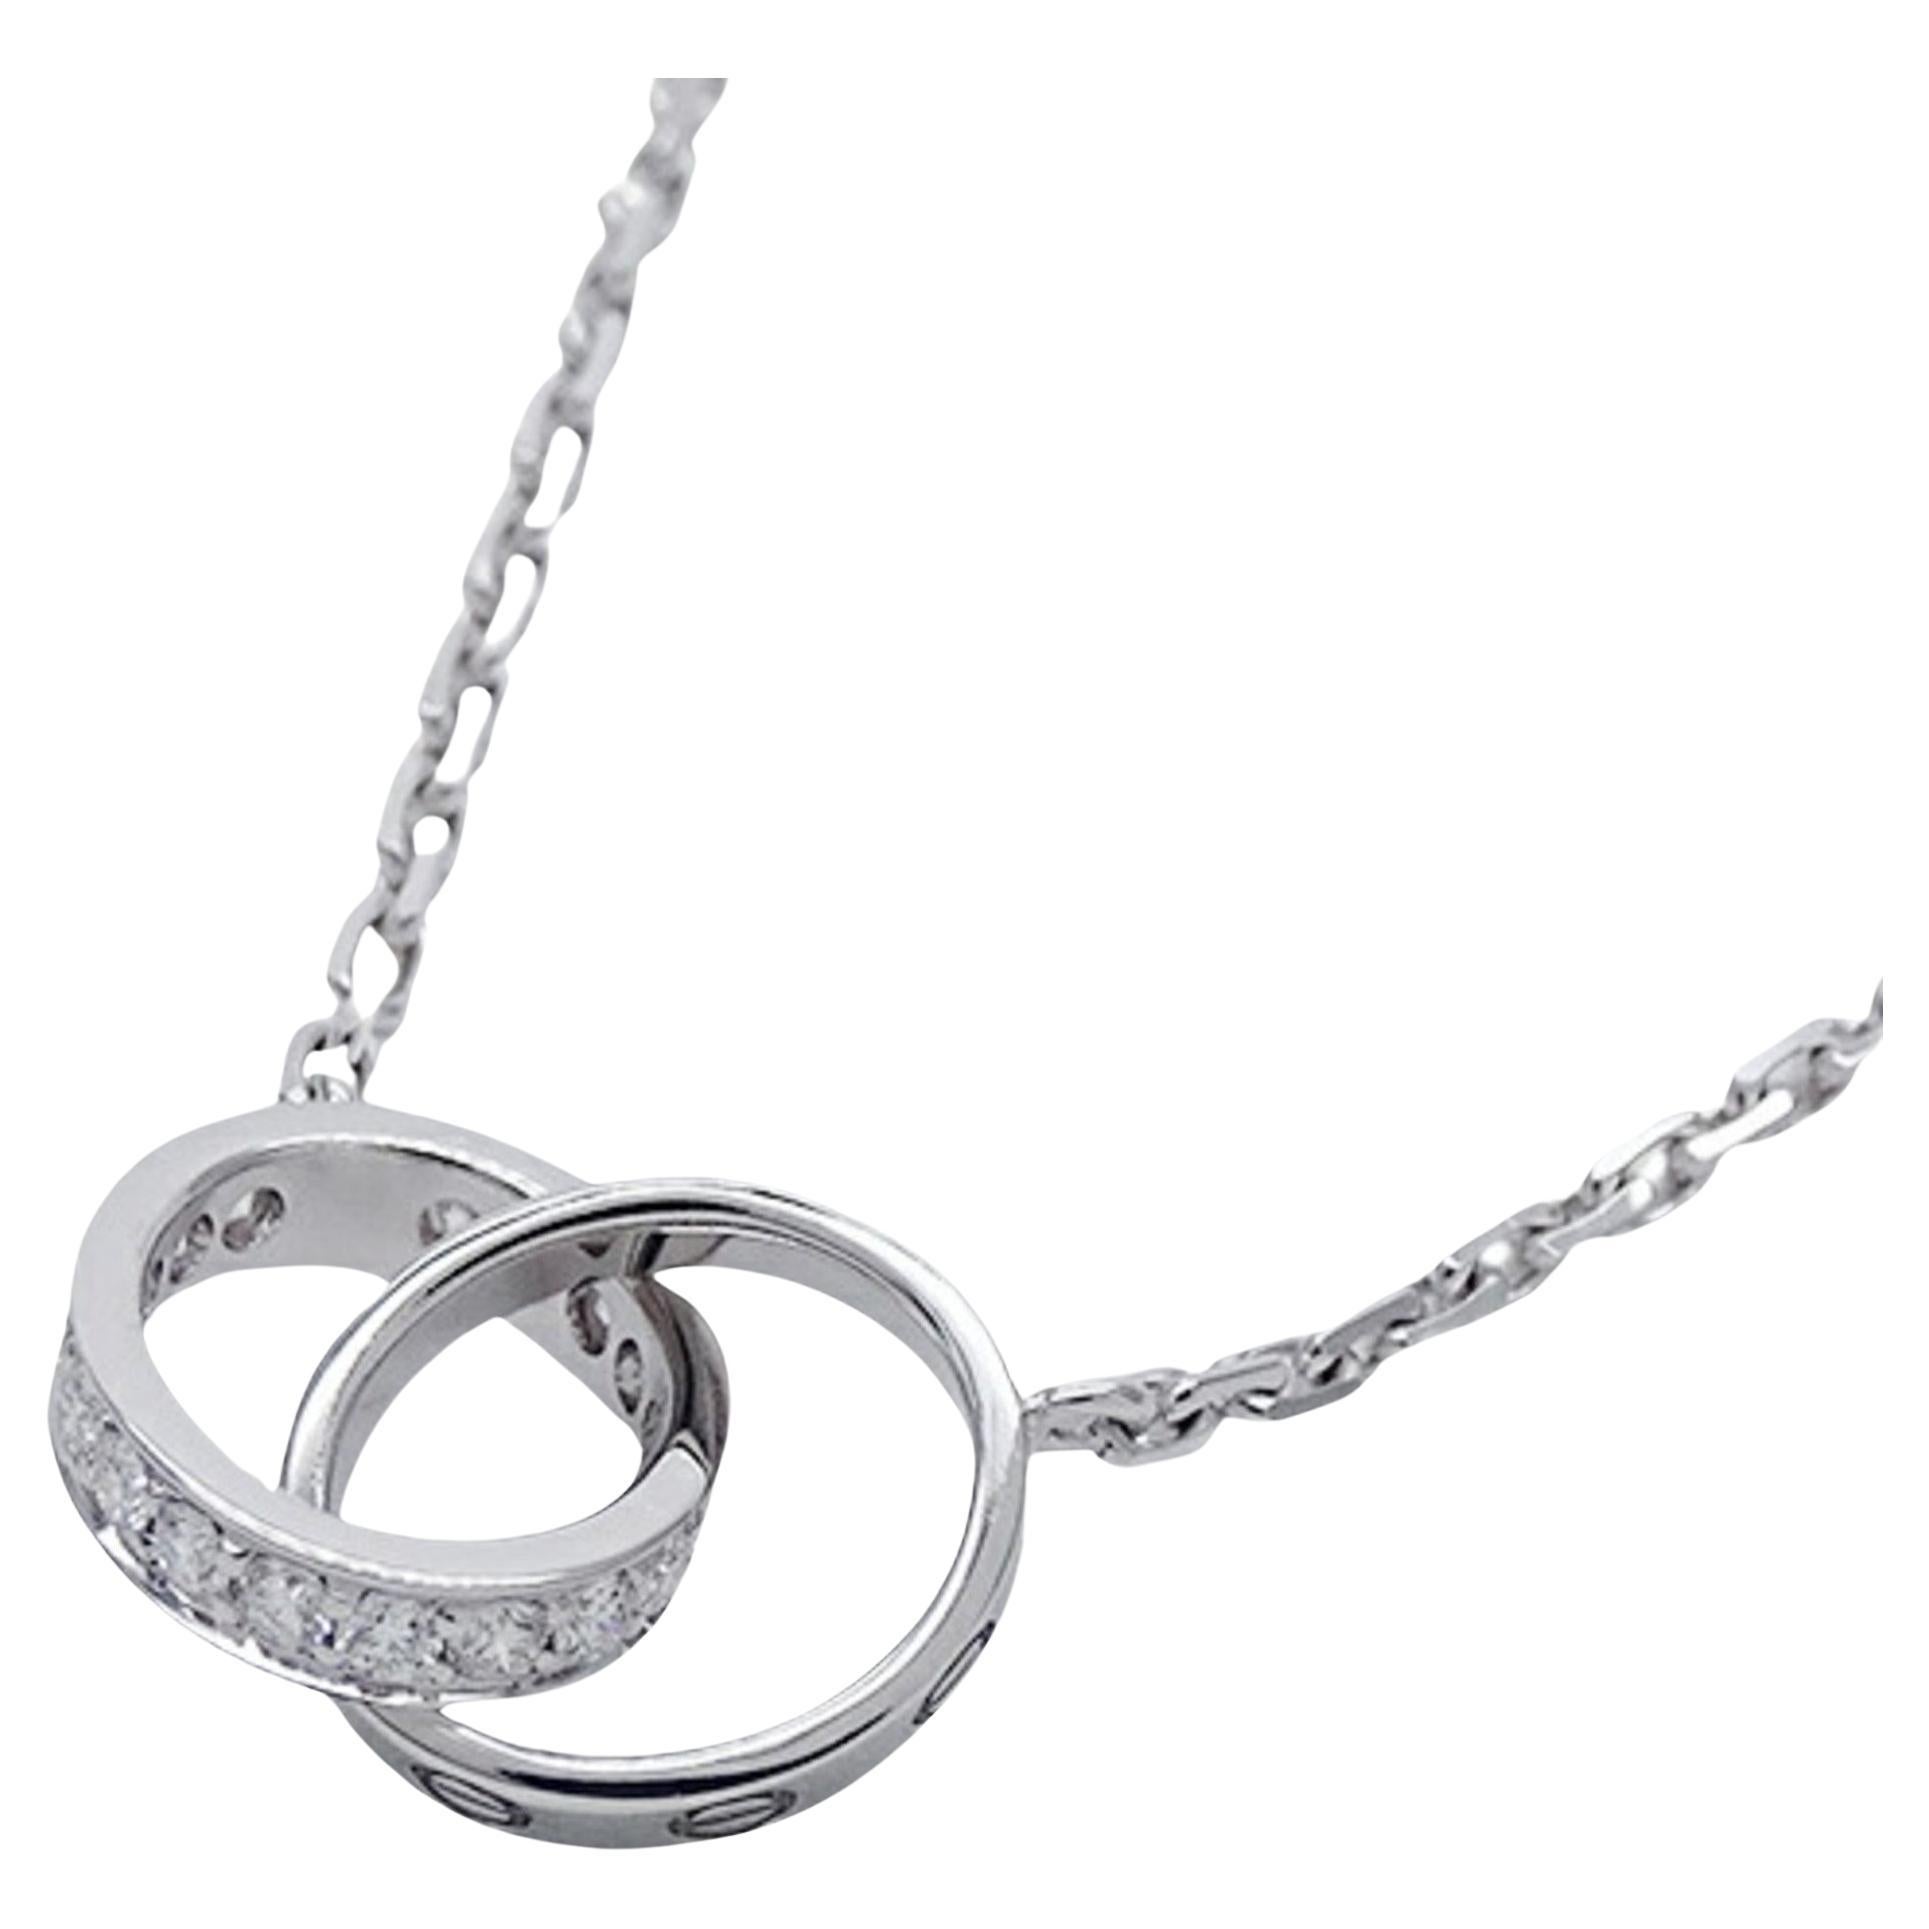 Cartier Baby Love Diamond Necklace in White Gold